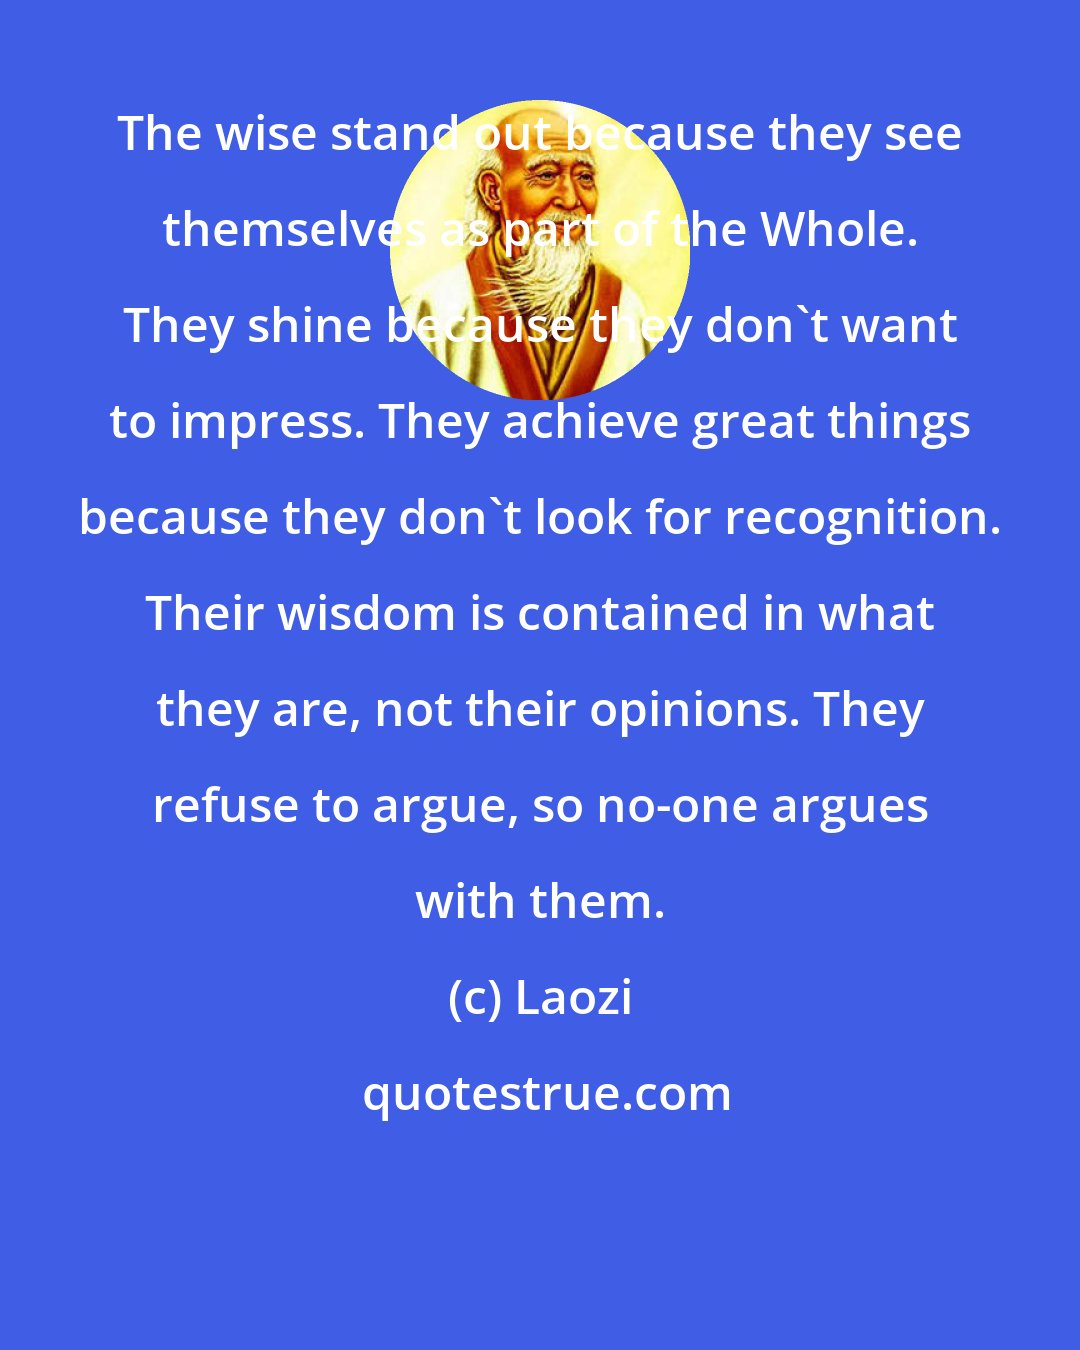 Laozi: The wise stand out because they see themselves as part of the Whole. They shine because they don't want to impress. They achieve great things because they don't look for recognition. Their wisdom is contained in what they are, not their opinions. They refuse to argue, so no-one argues with them.